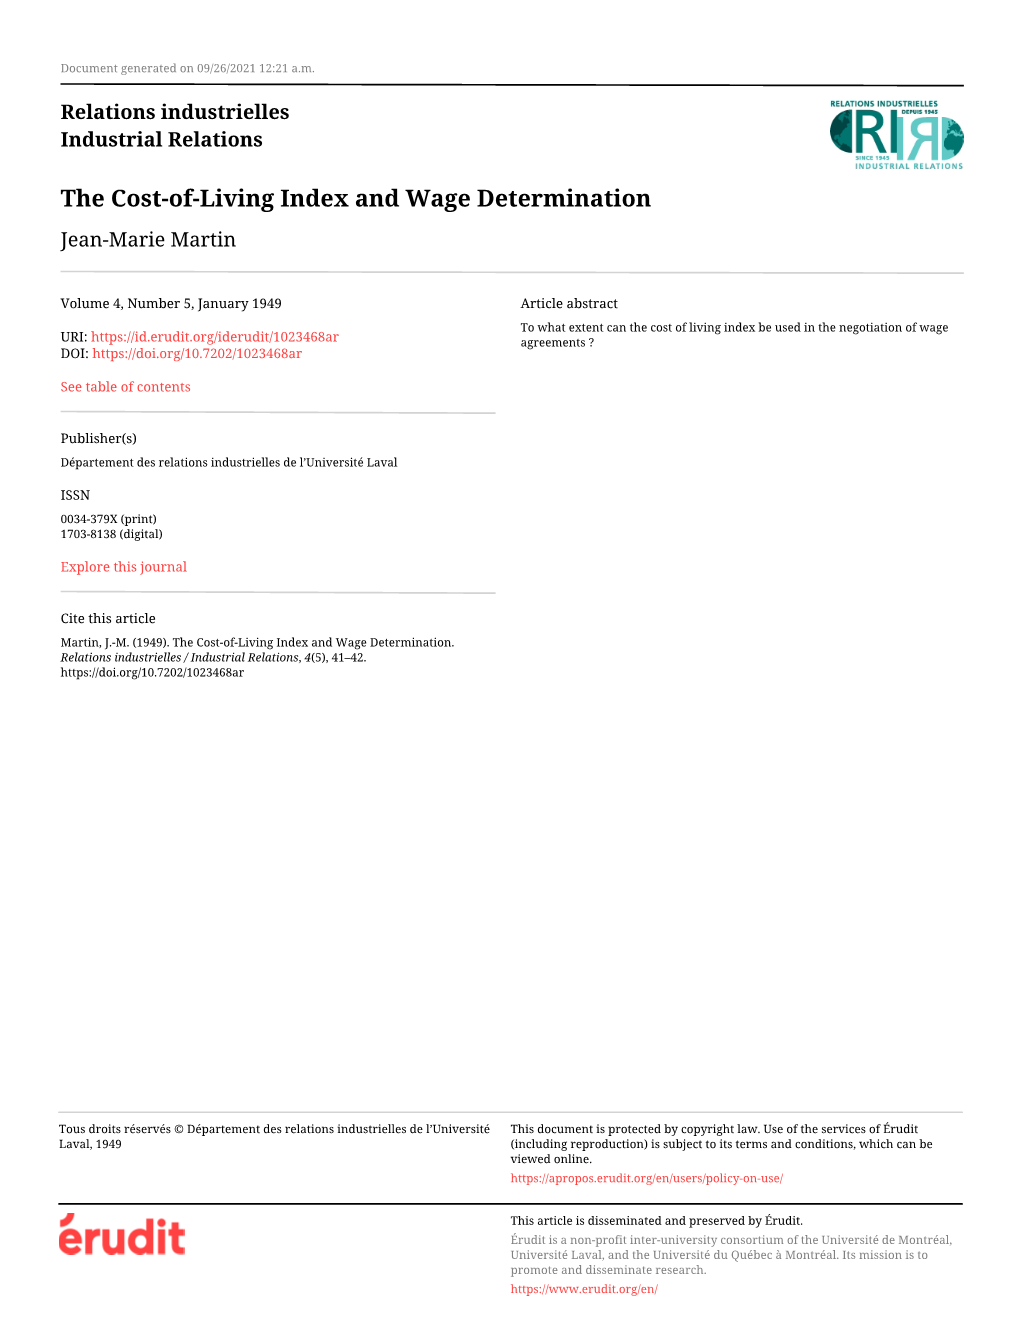 The Cost-Of-Living Index and Wage Determination Jean-Marie Martin